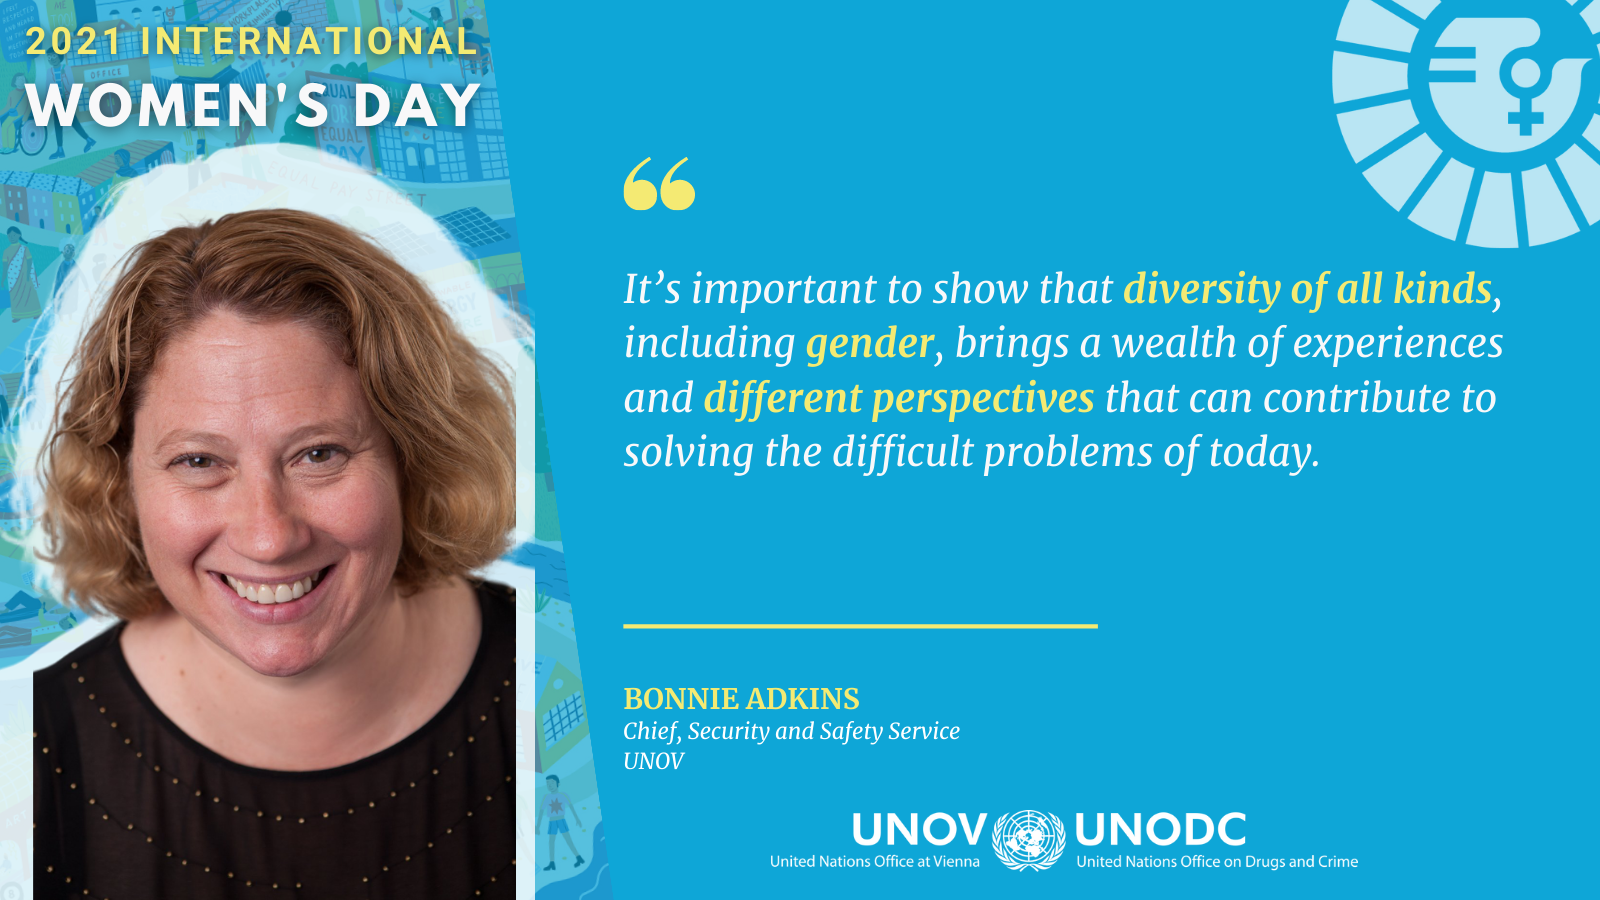 Quote of Bonnie Adkins "“It’s important to show that diversity of all kinds, including gender, brings a wealth of experiences and different perspectives that can contribute to solving the difficult problems of today”